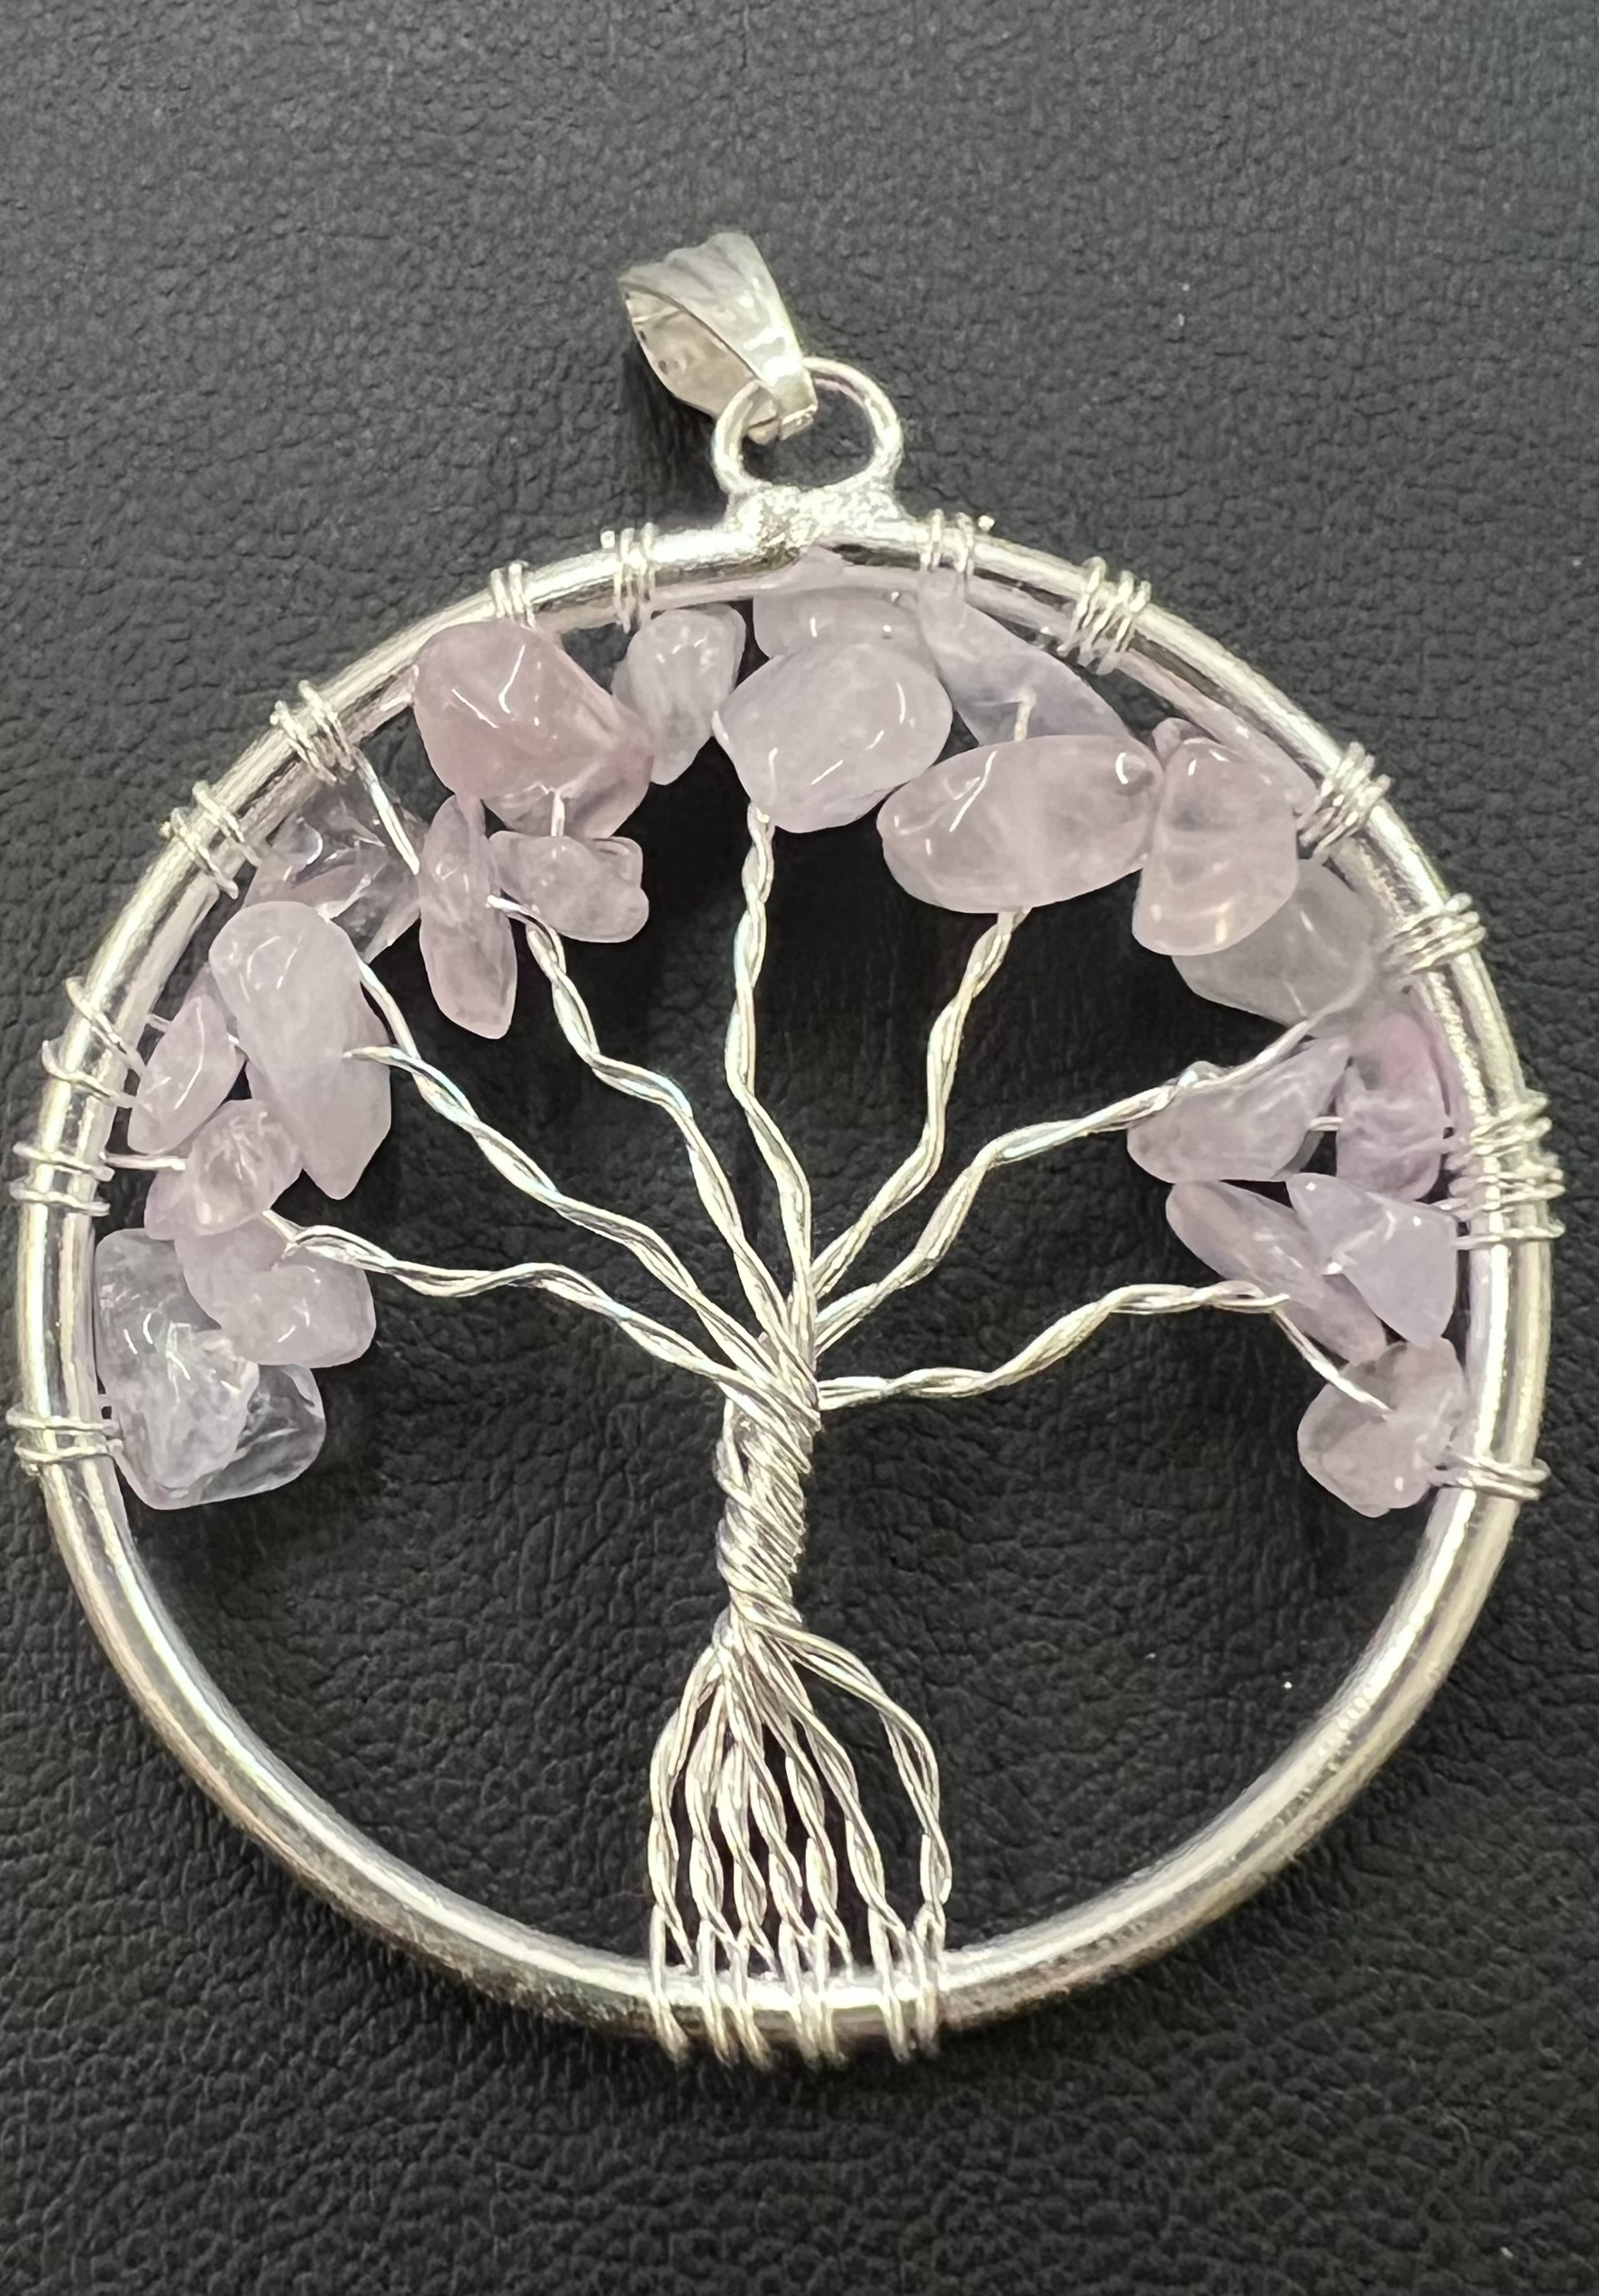 Natural Stone Tree of Life Pendant in Silver - 1.5 inches - Rose Quartz